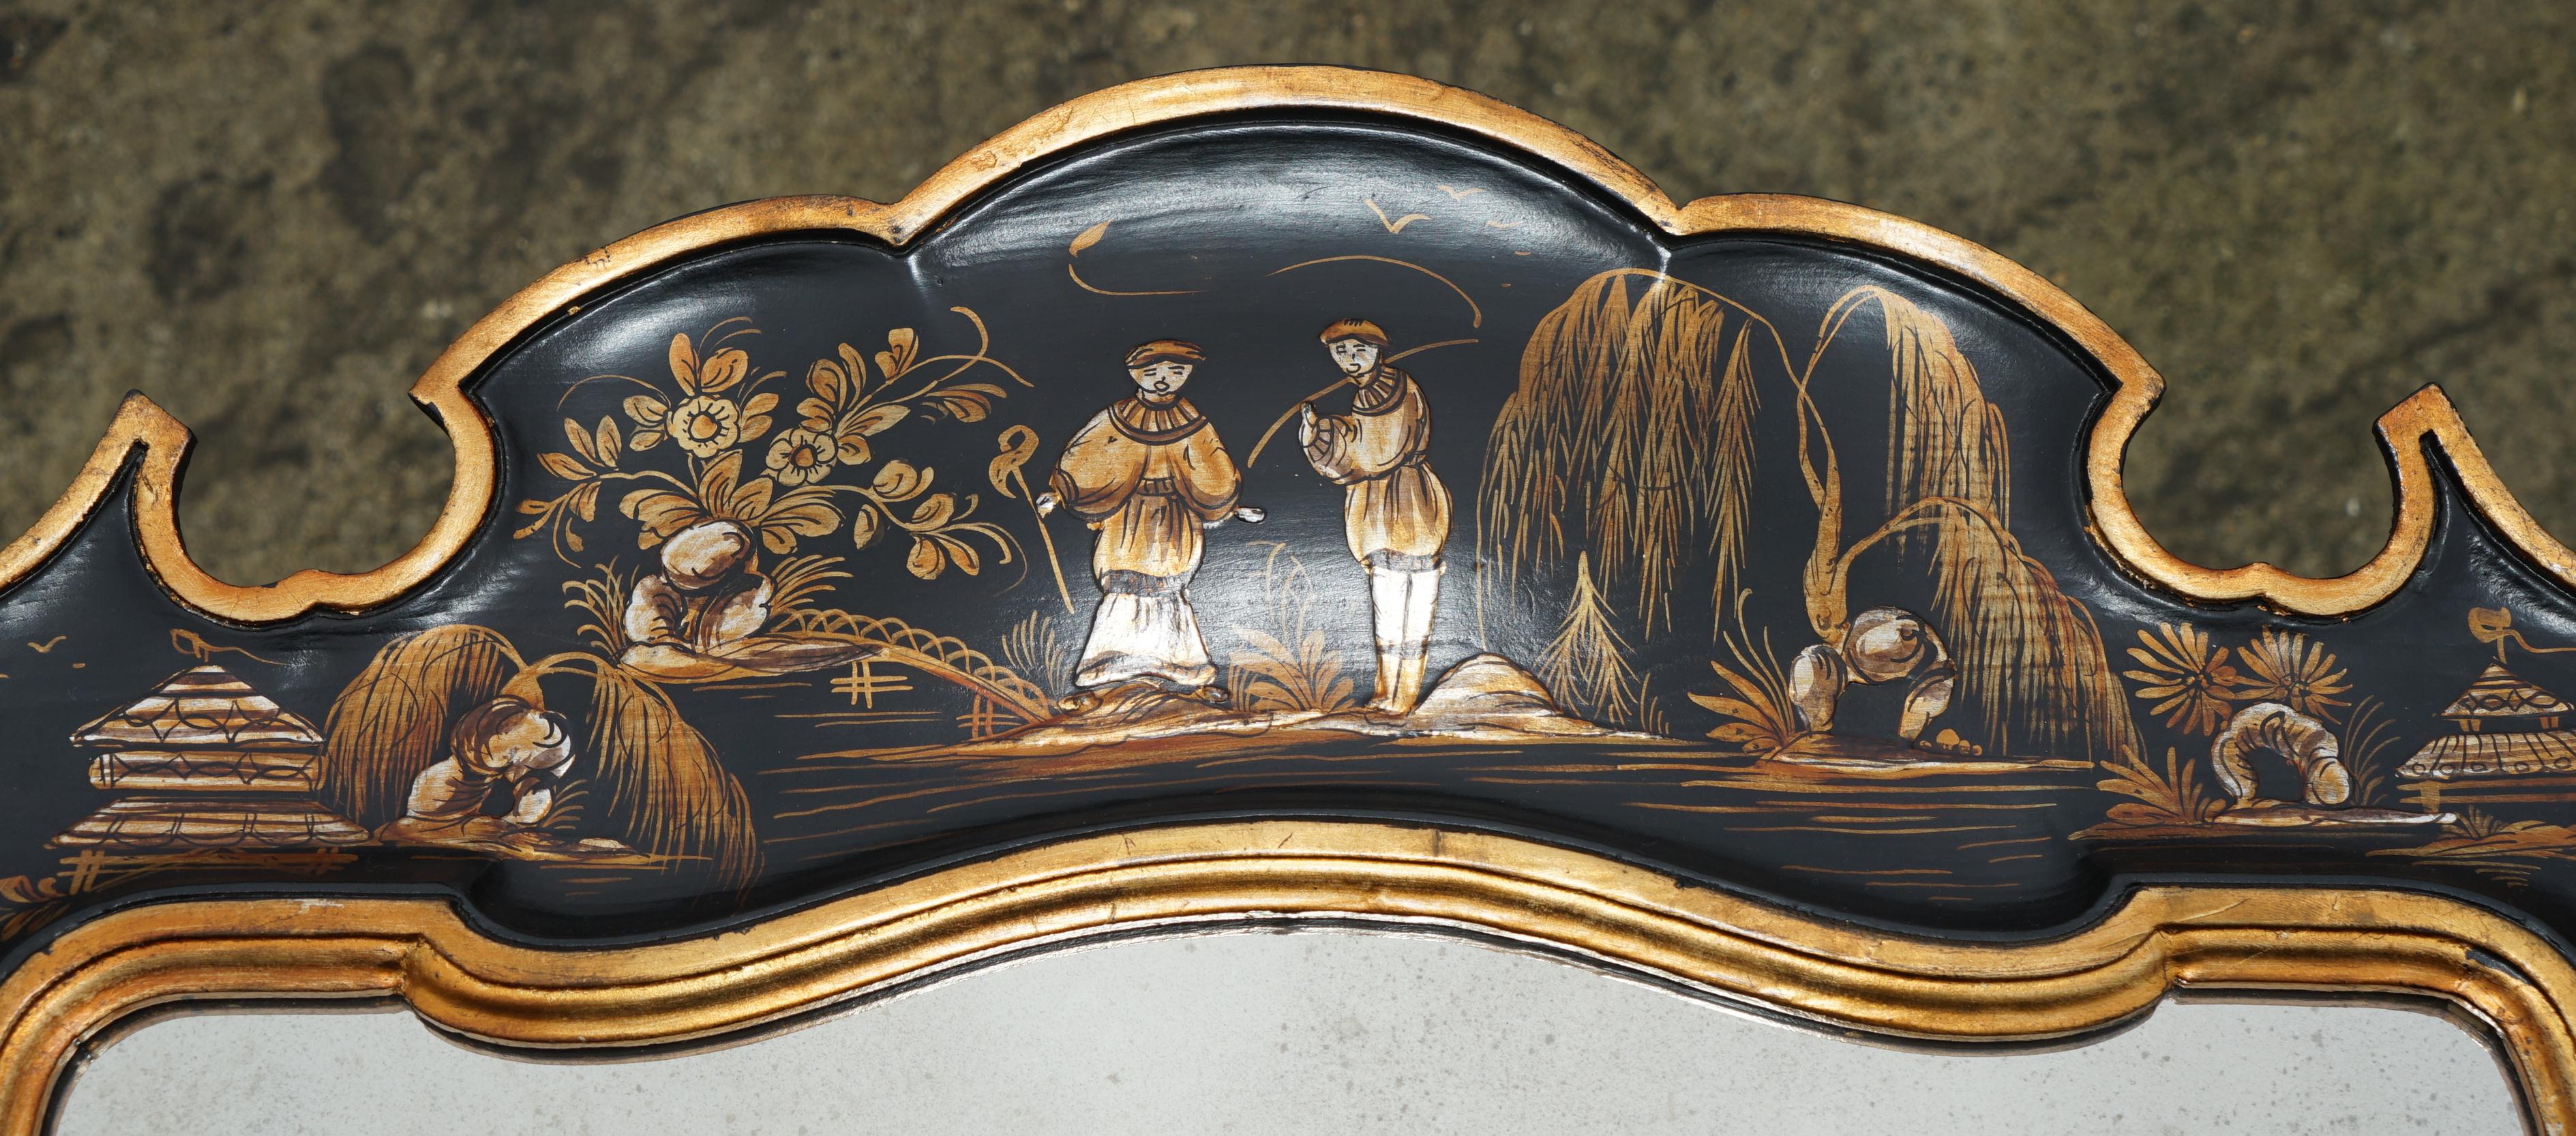 1.4 METER CHINESE CHINOISERIE MiRROR ORNATE HAND PAINTINGS STAMPED MADE IN ITALY For Sale 5